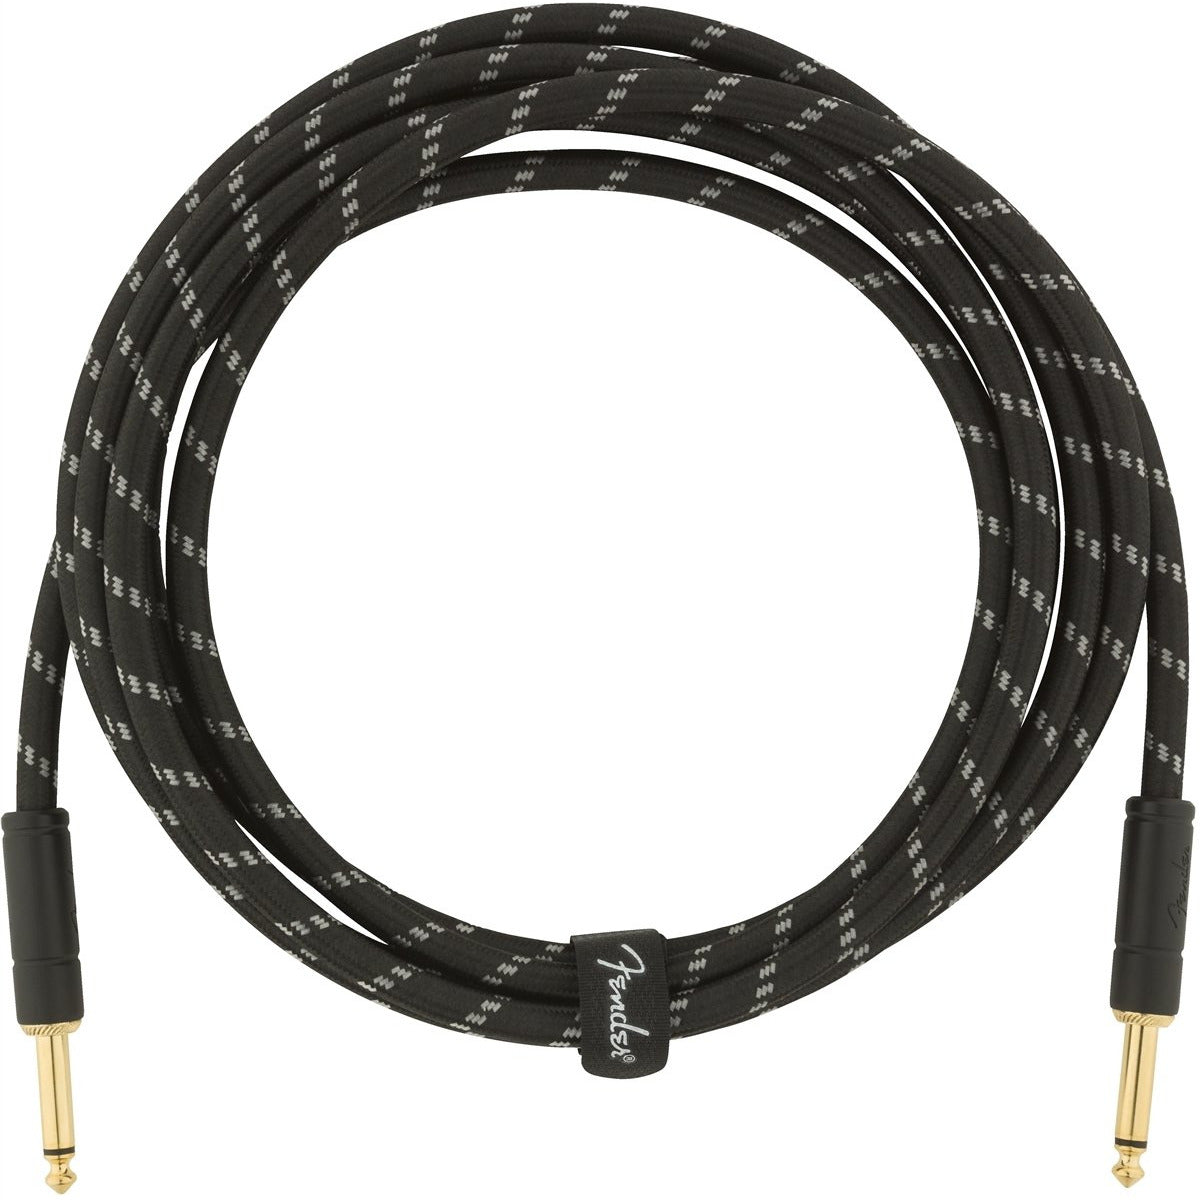 Image 2 of Fender Deluxe Series Instrument Cable, 10', Black Tweed - SKU# FDLX-10-BTWD : Product Type Cables & Accessories : Elderly Instruments